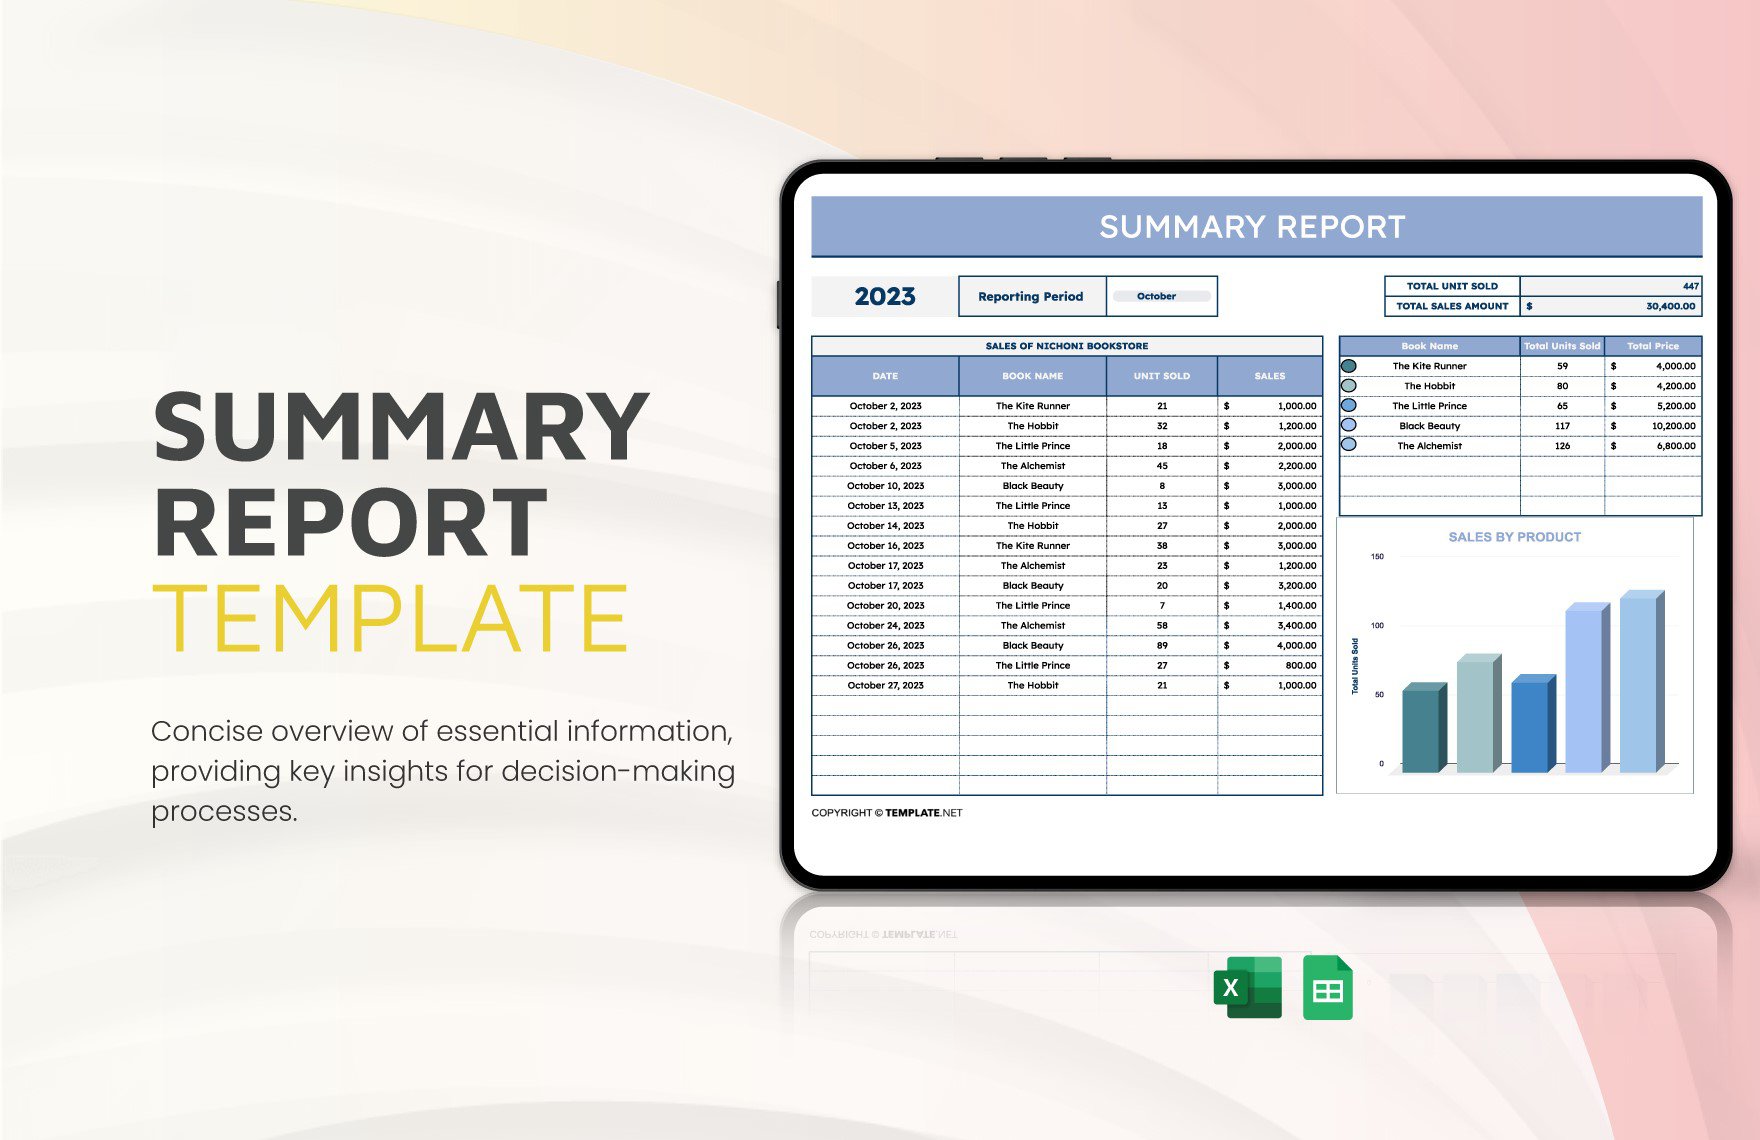 Free Summary Report Template